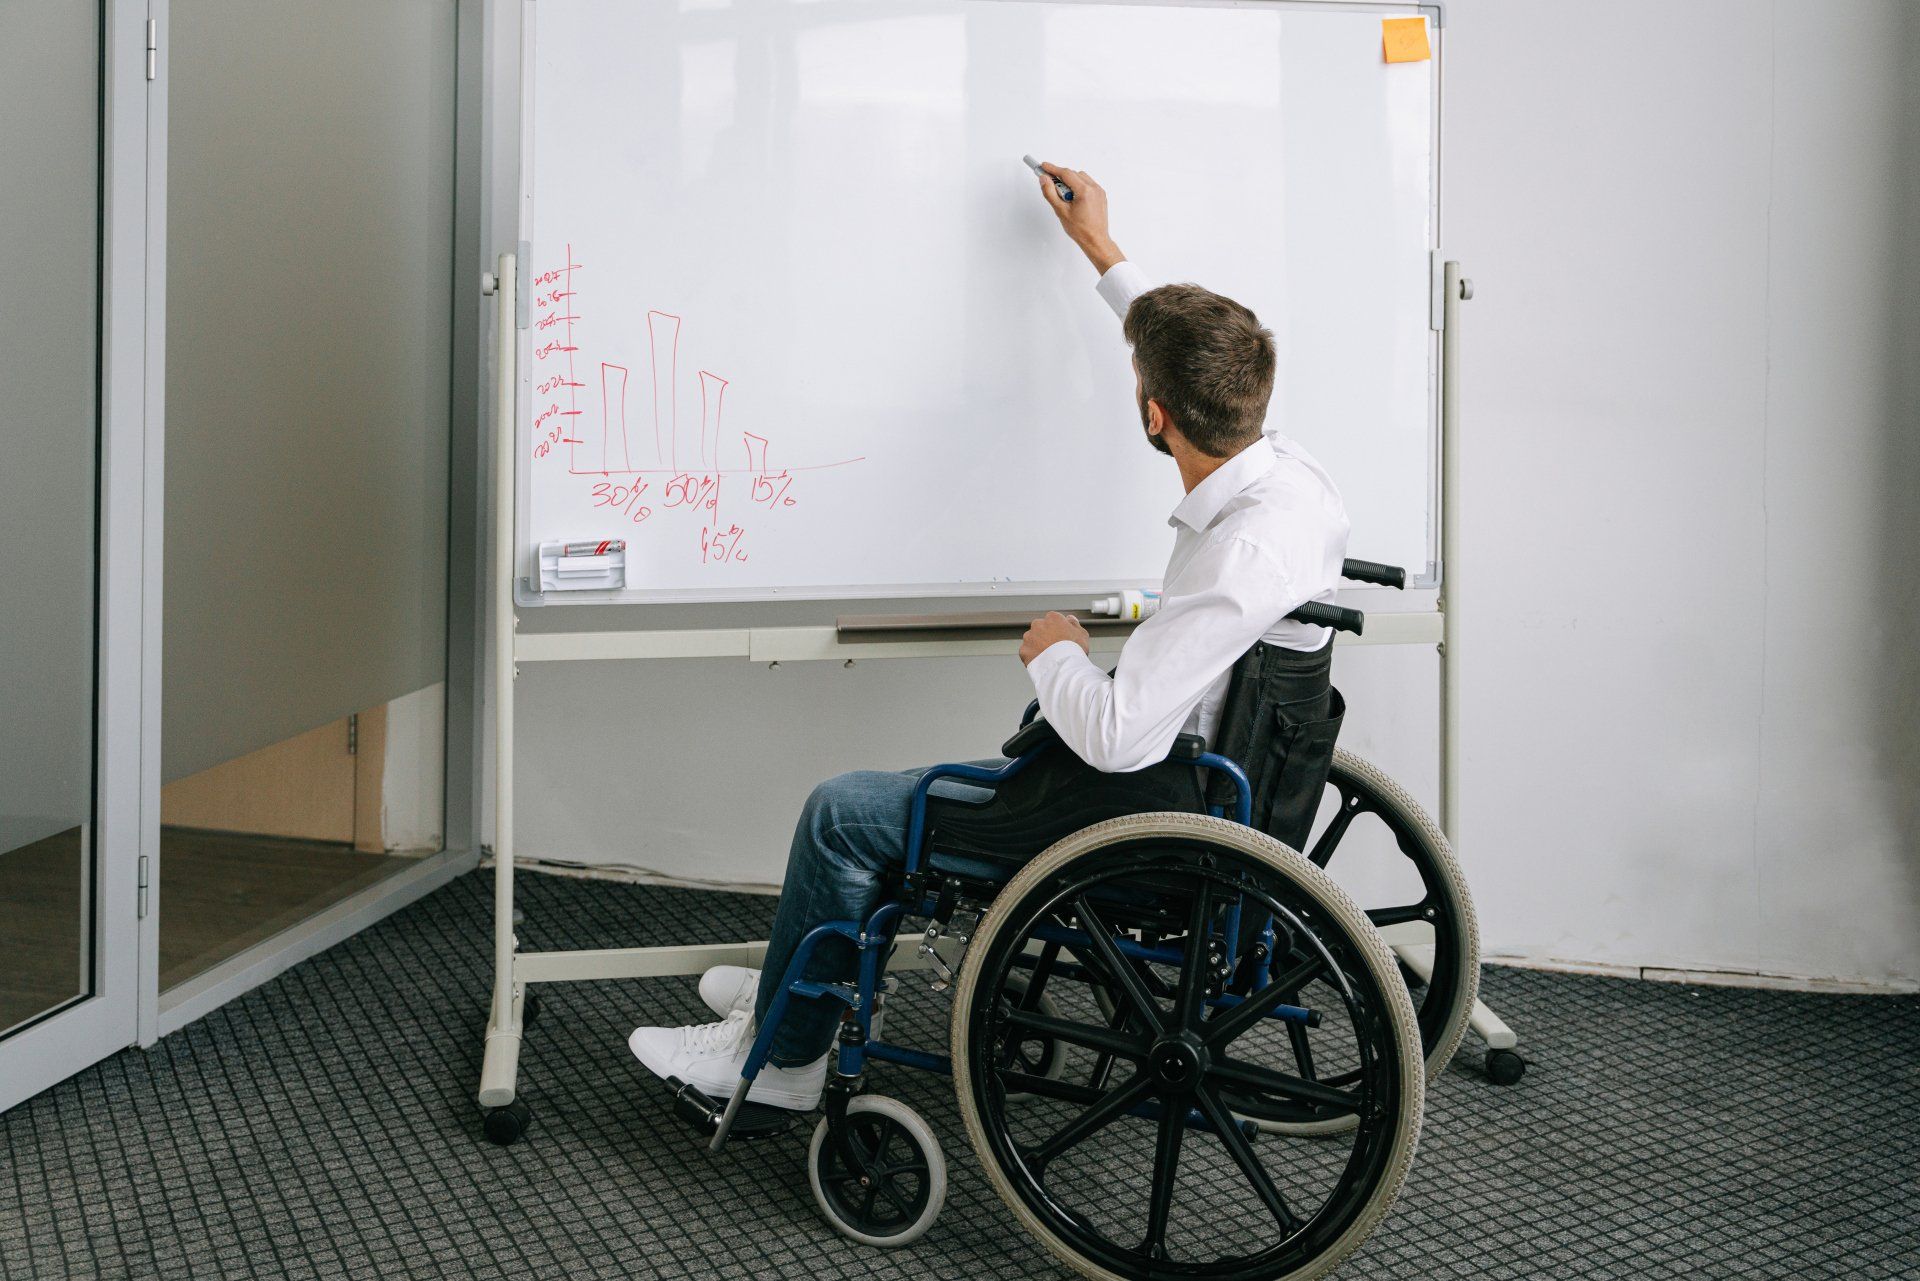 Disability Discrimination - key facts for the workplace